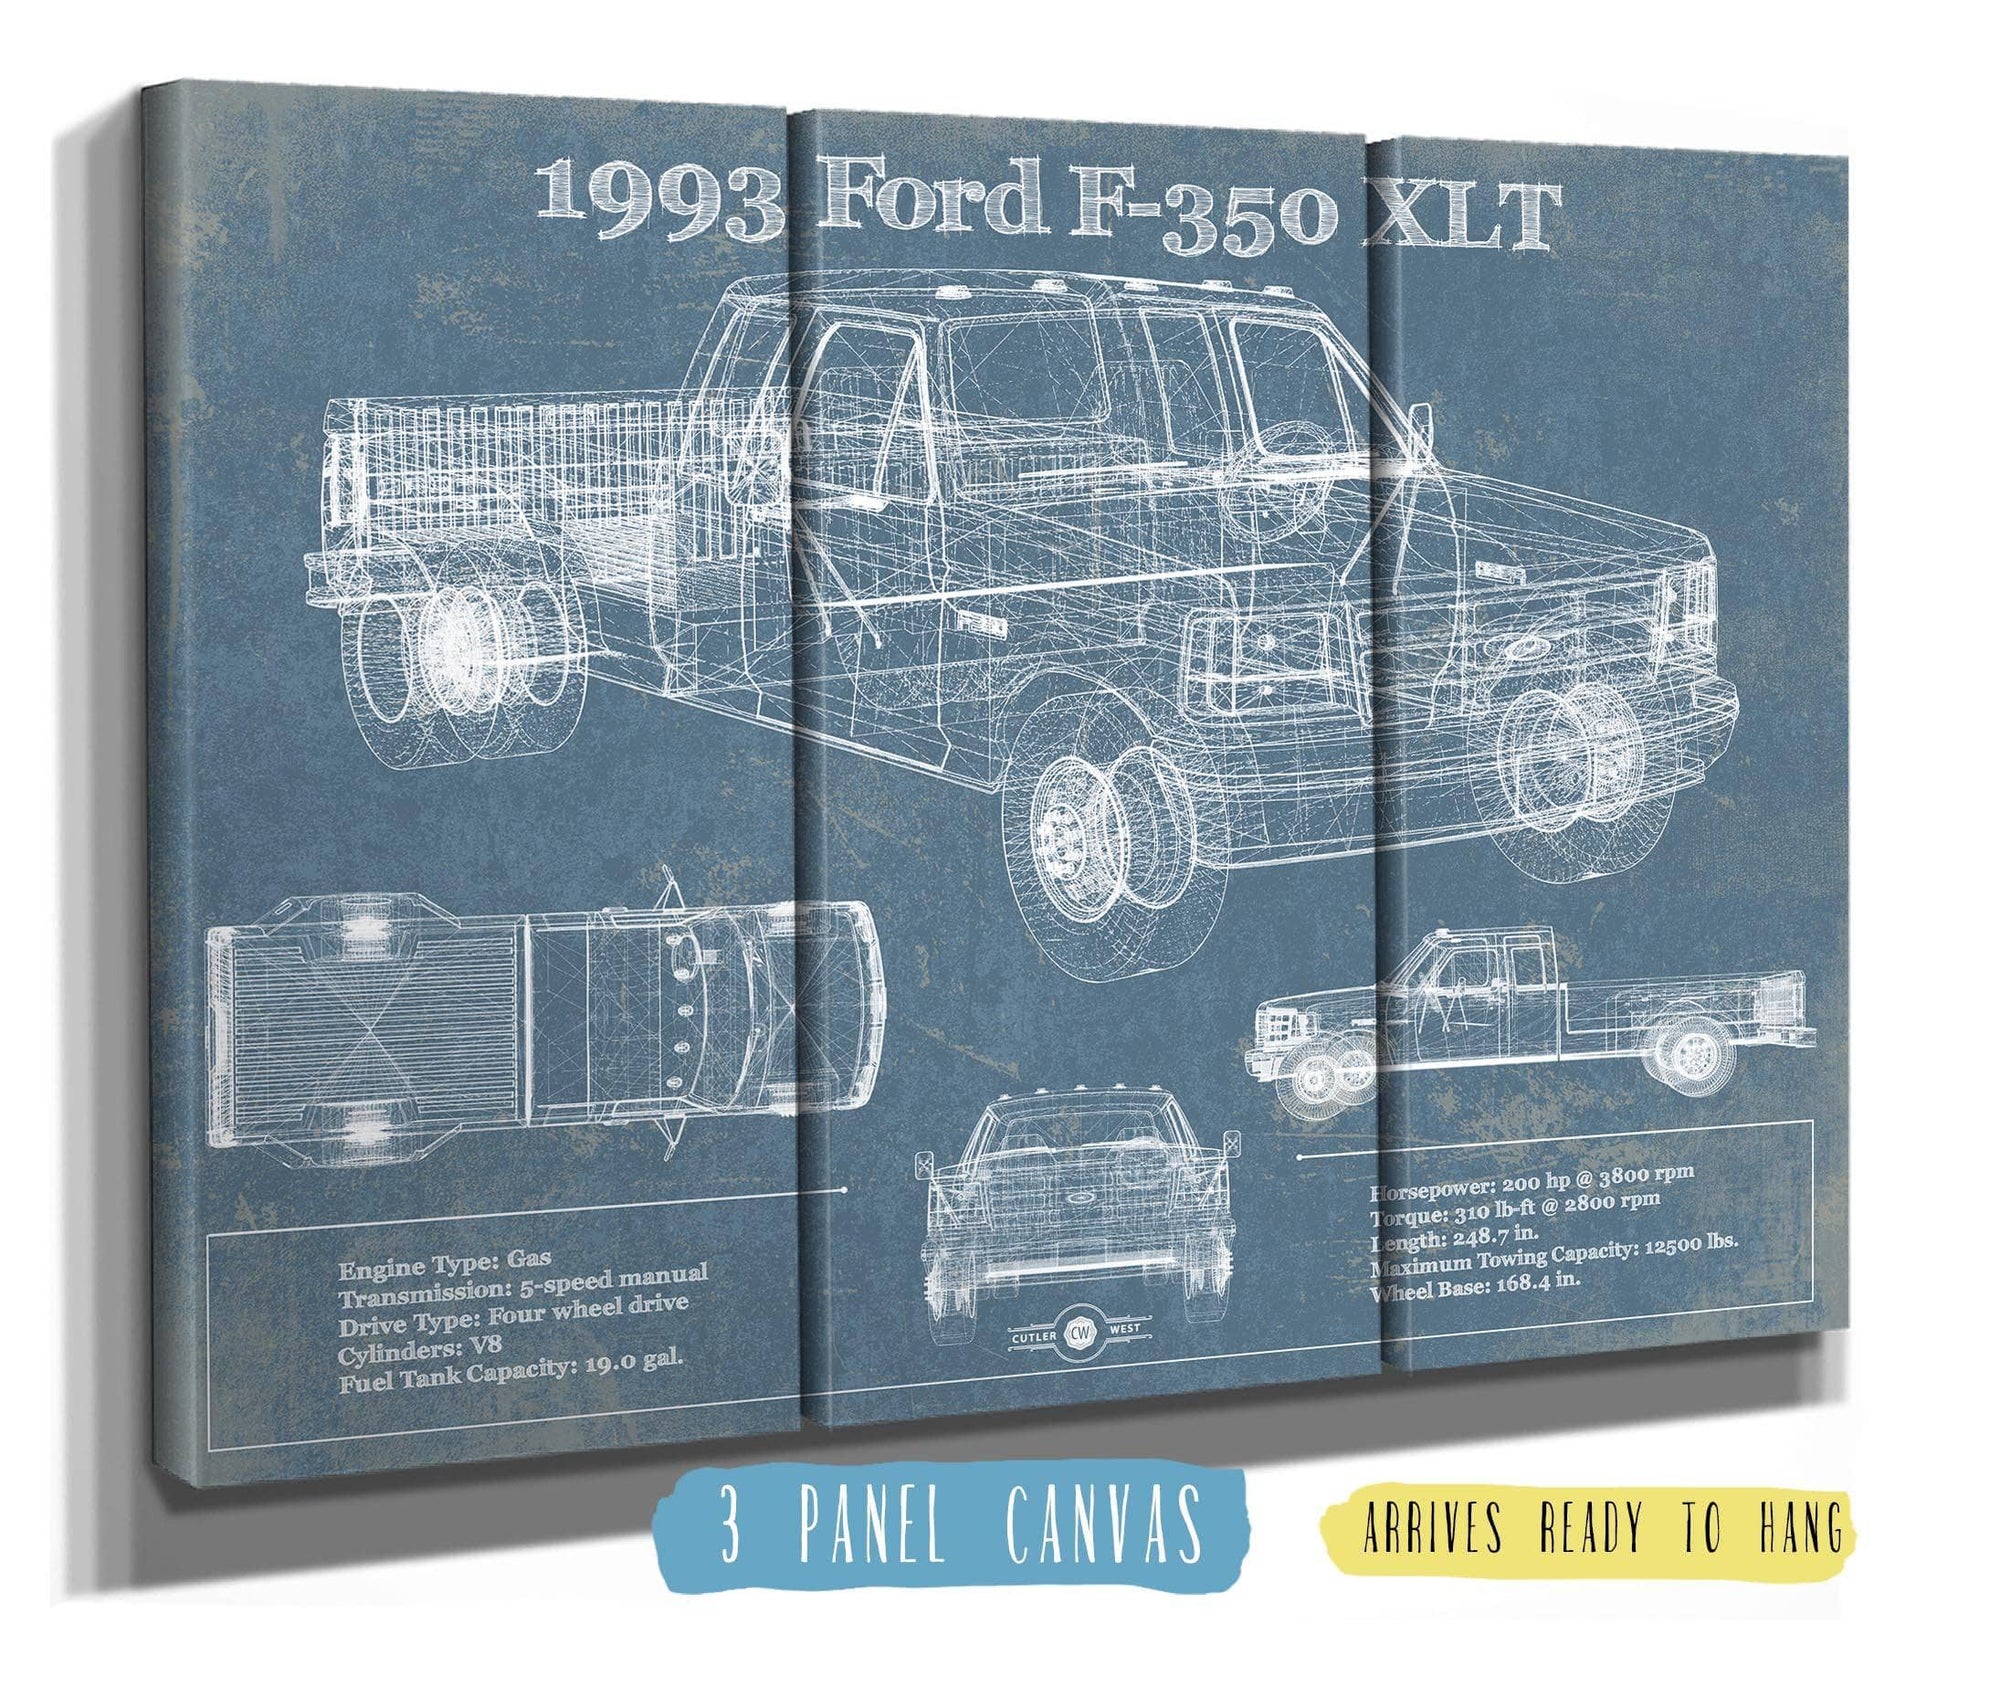 Cutler West Ford Collection 1993 Ford F 350 XLT Vintage Blueprint Auto Print